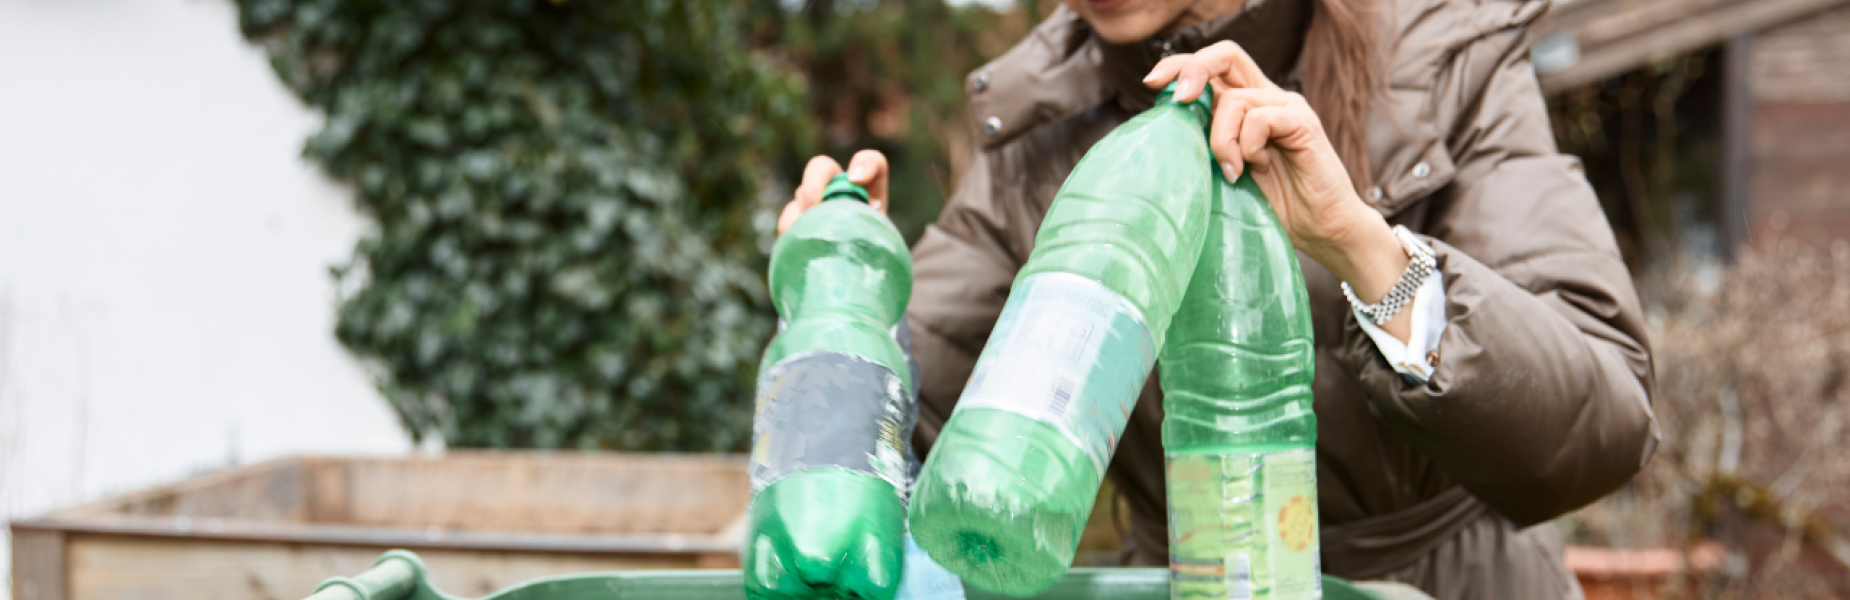 Woman recycling plastic bottles